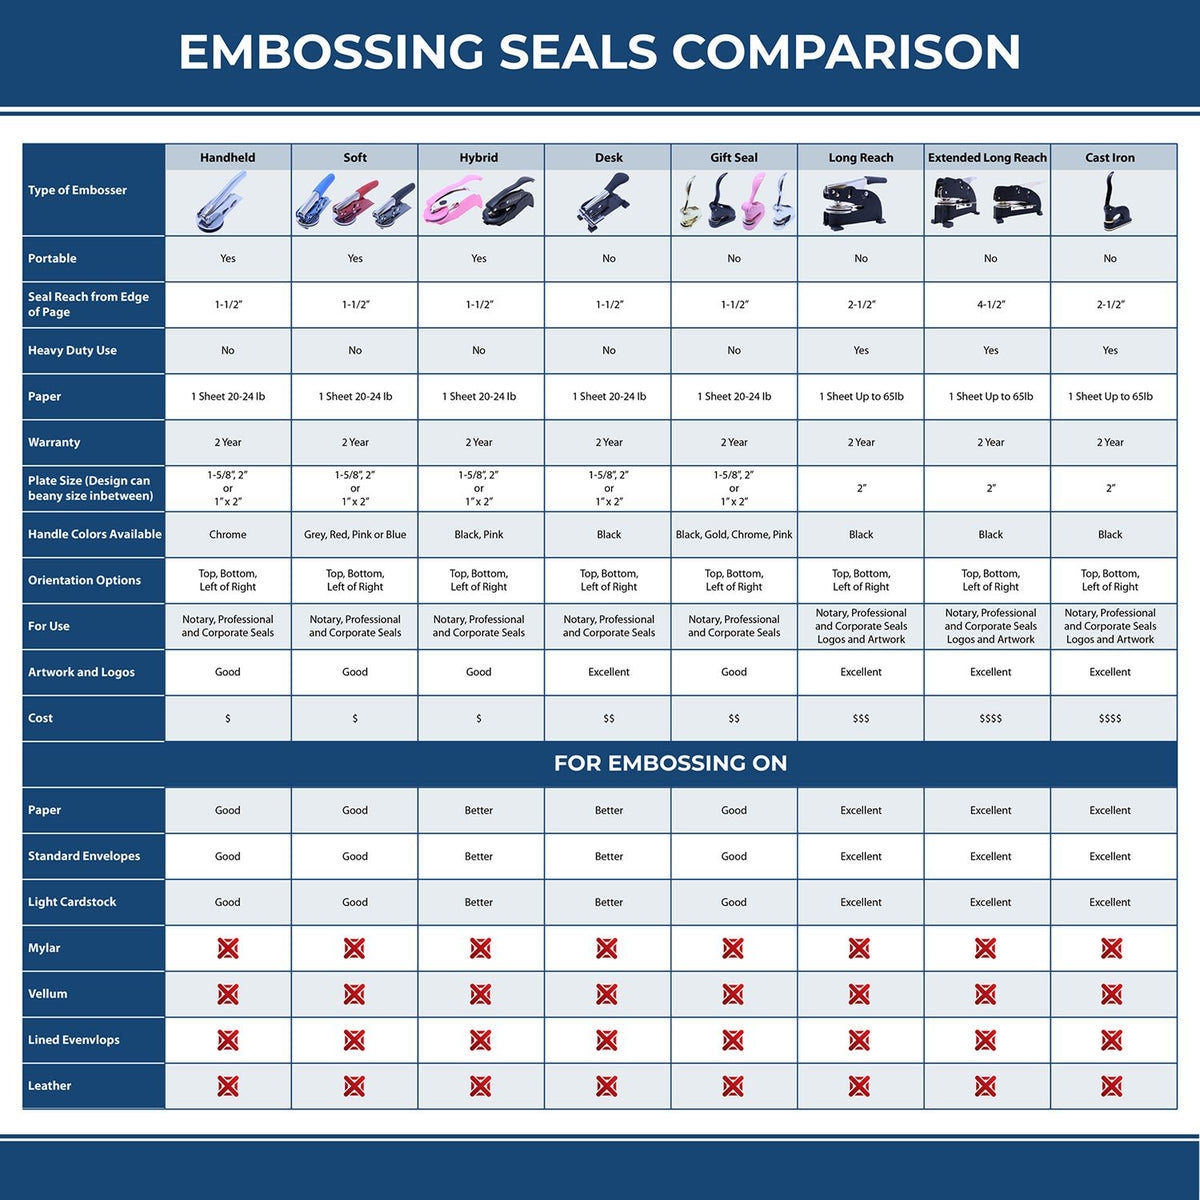 A comparison chart for the different types of mount models available for the Hybrid Louisiana Land Surveyor Seal